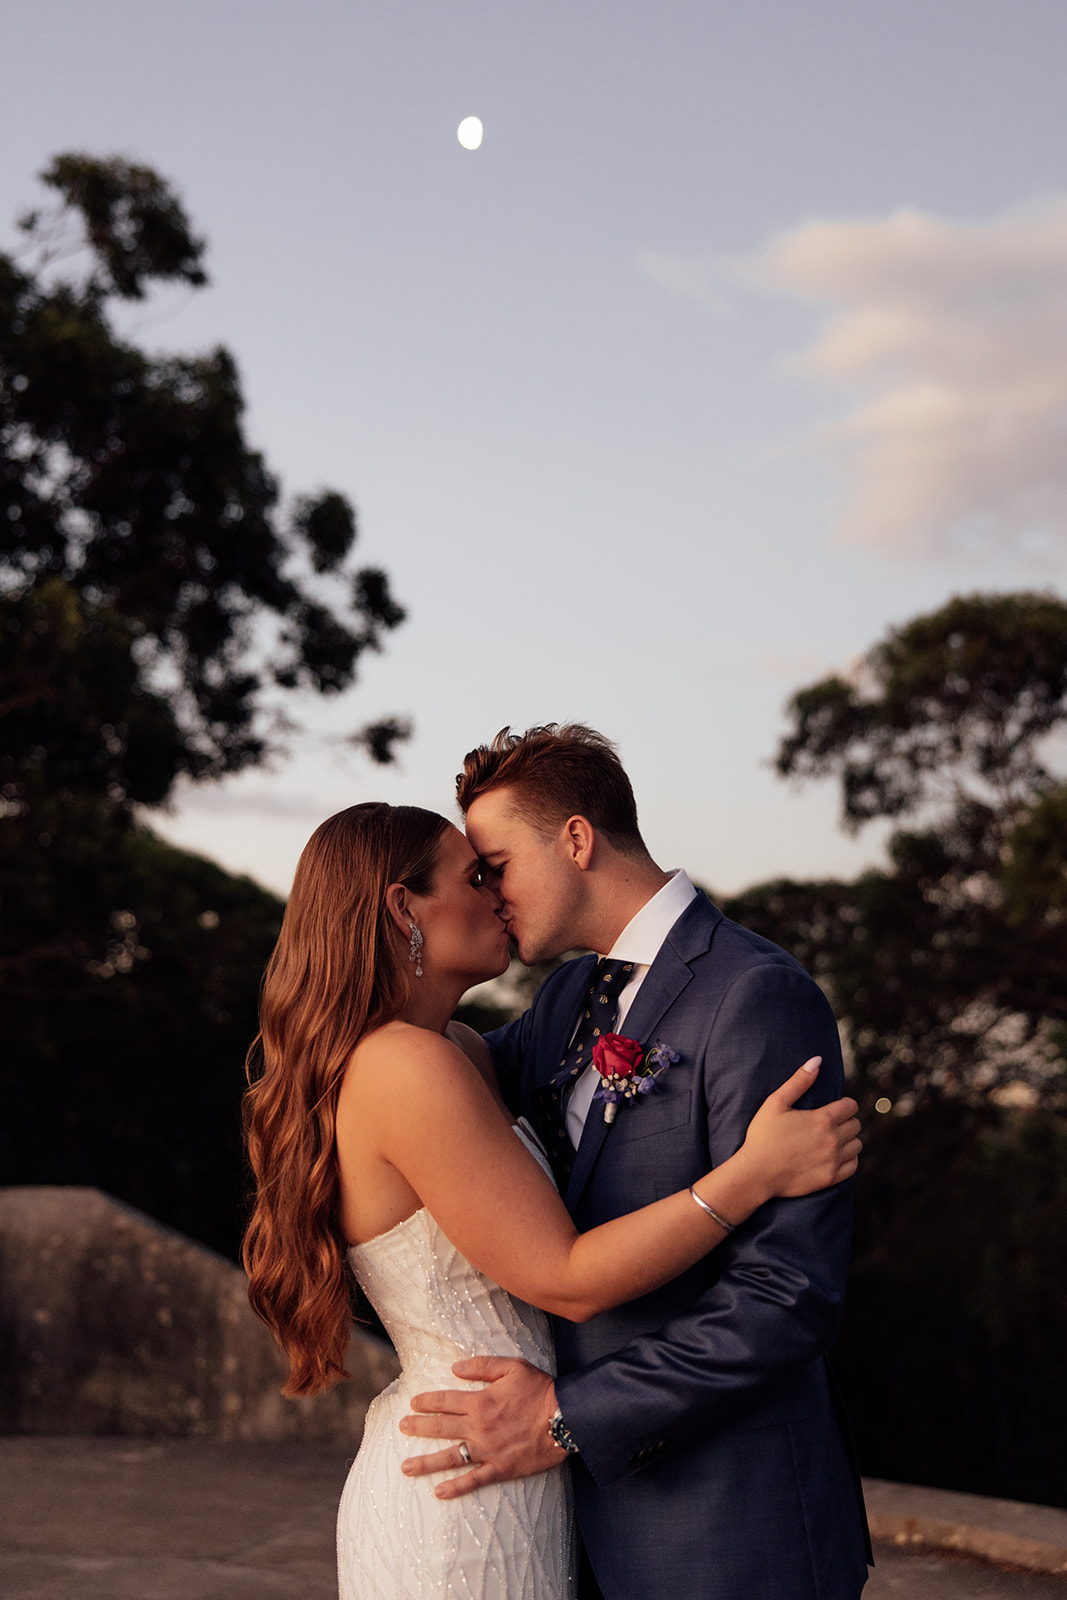 A bride and groom kissing with the moon in the background